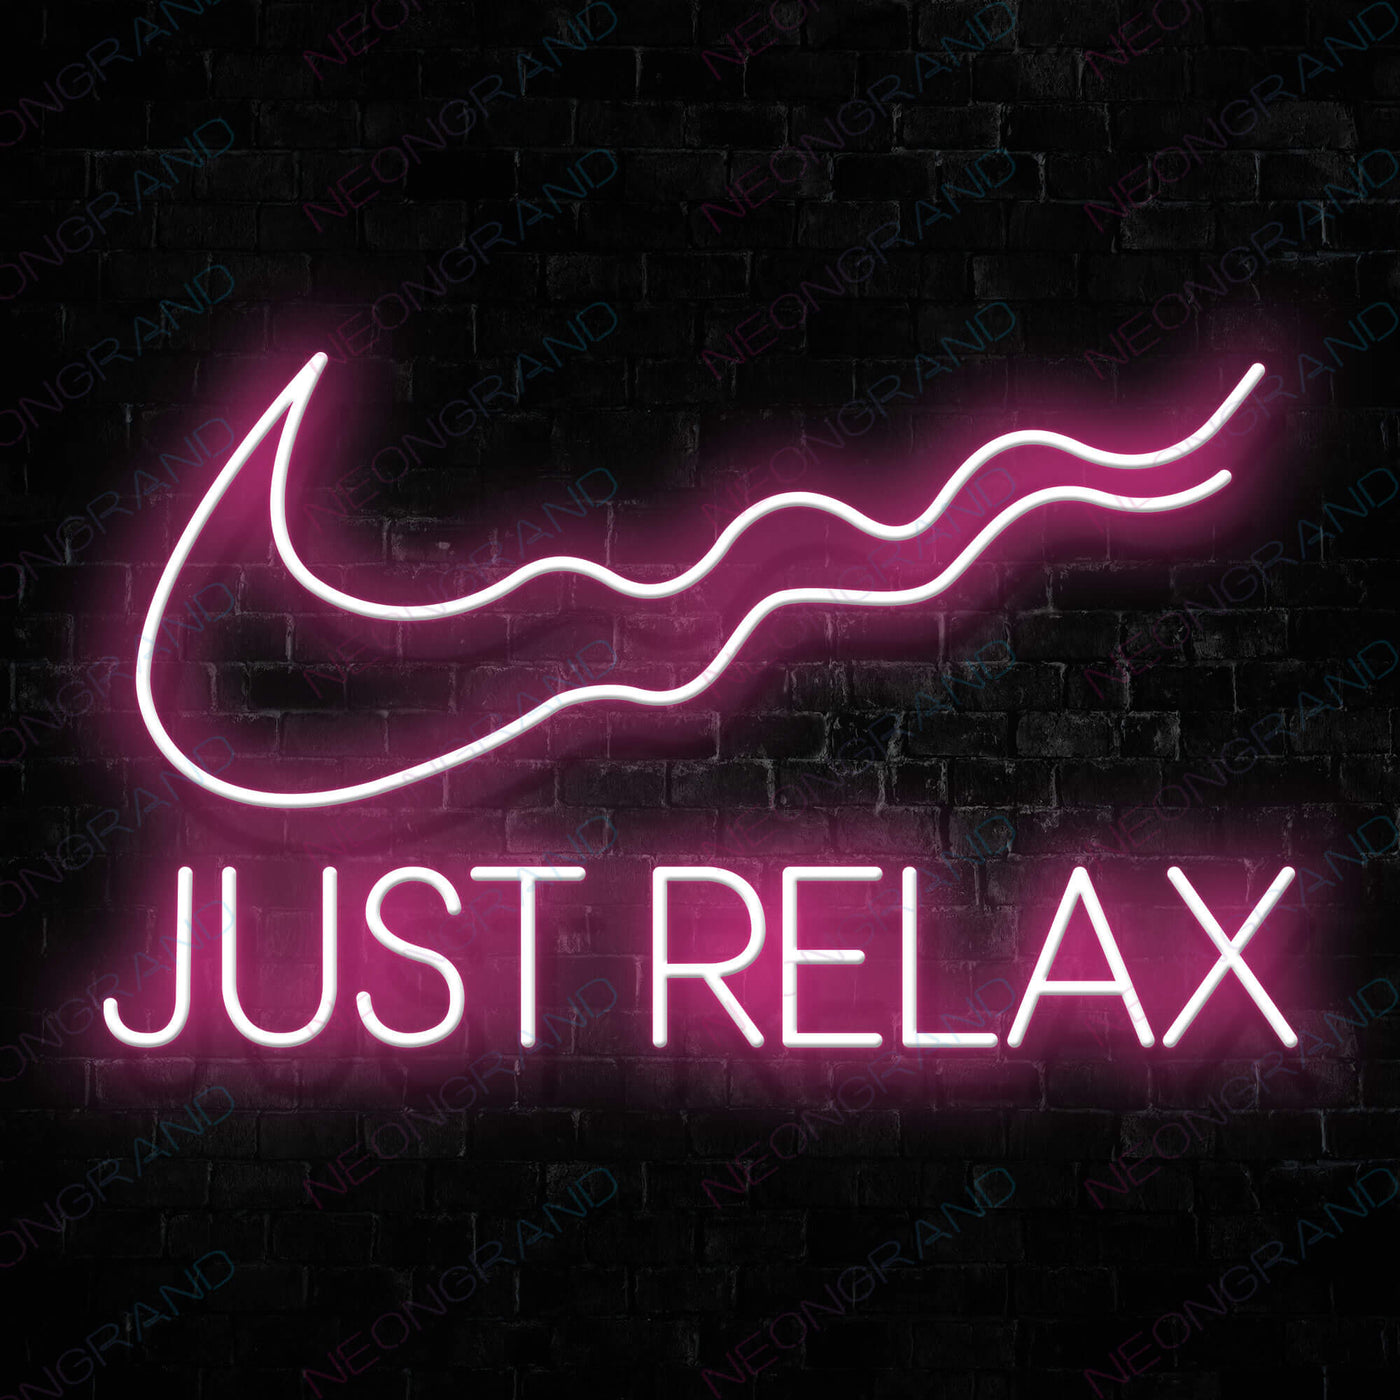 Just Relax Neon Sign Led Light pink